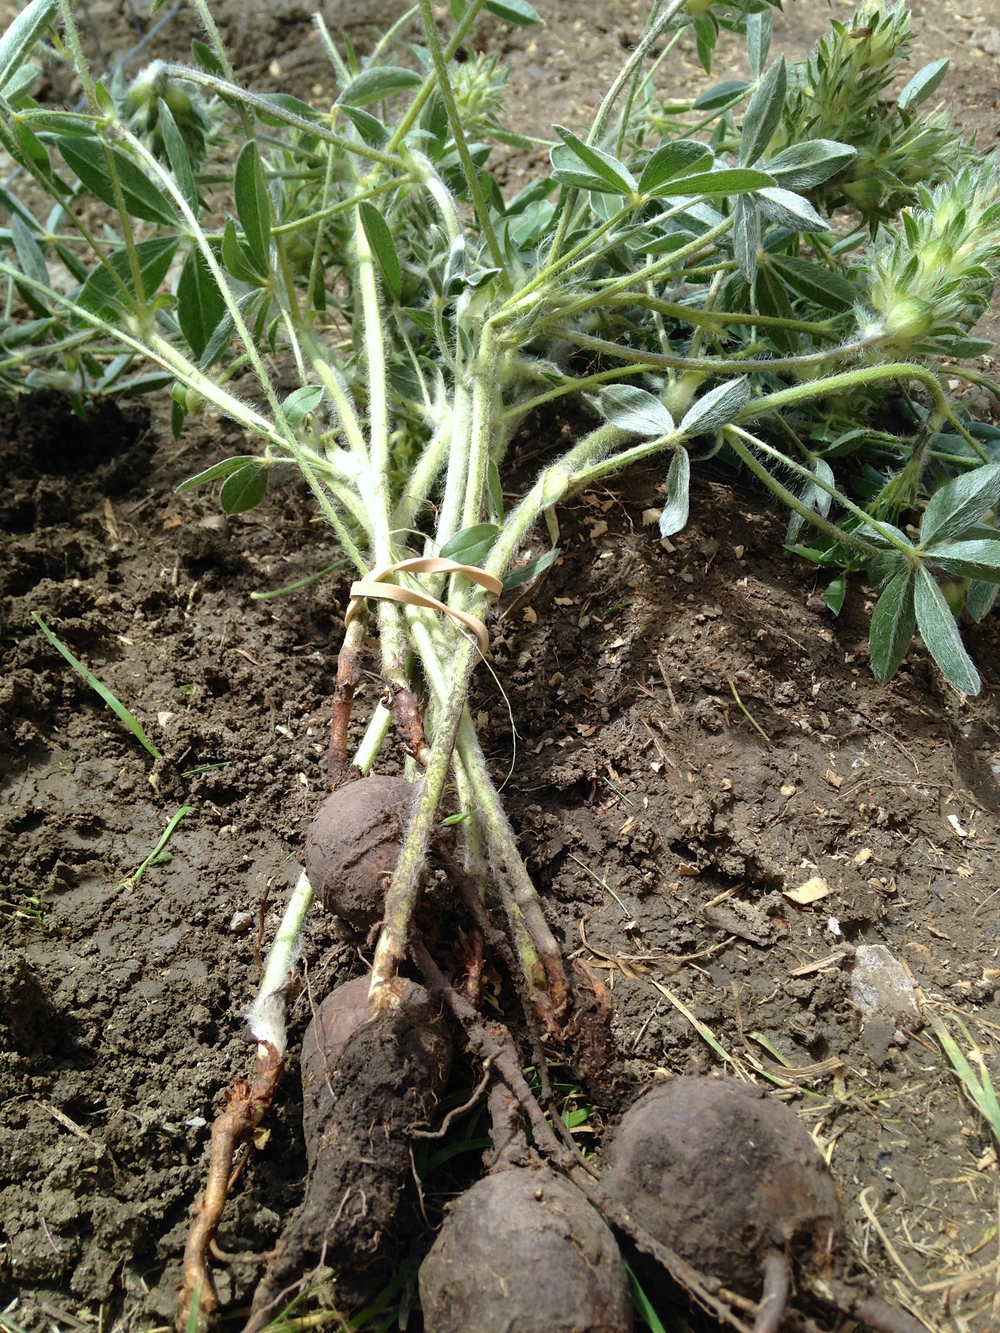 Recently pulled up bunch of prairie turnips, dark bulbs attached to light green leafy stems.